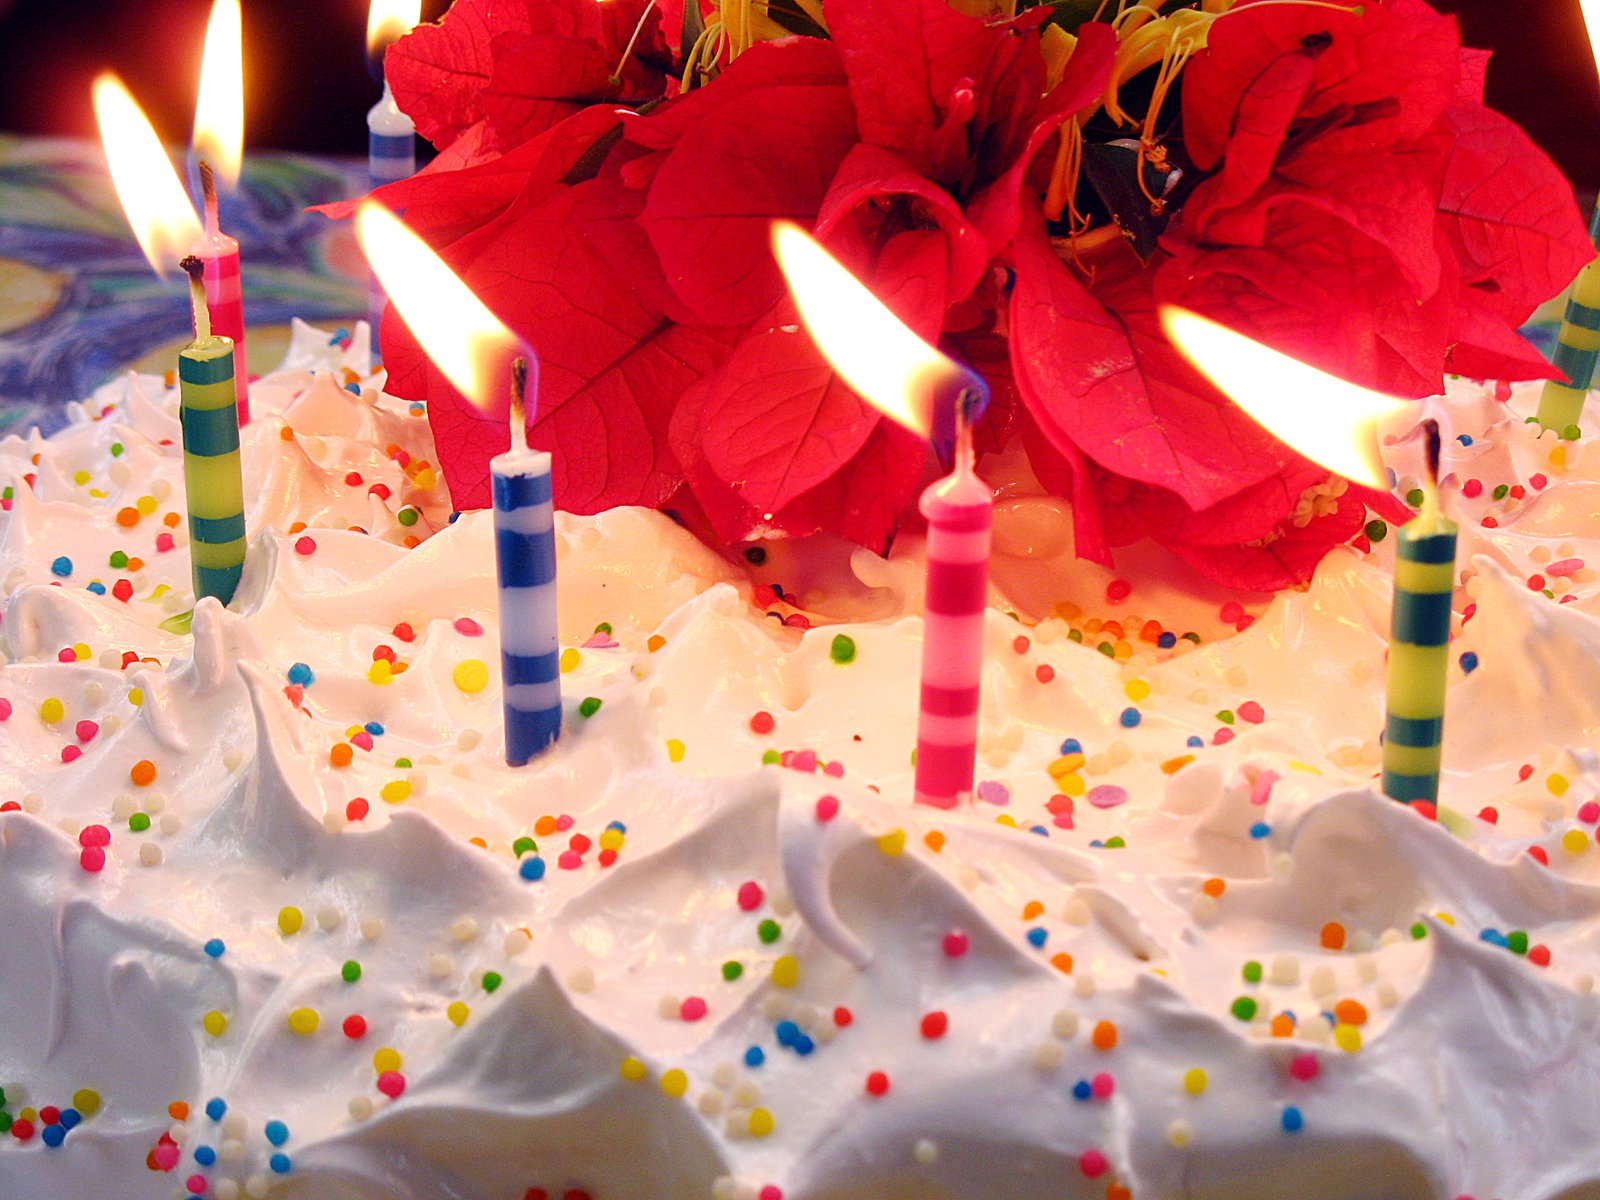 a group of candles are glowing in front of a cake